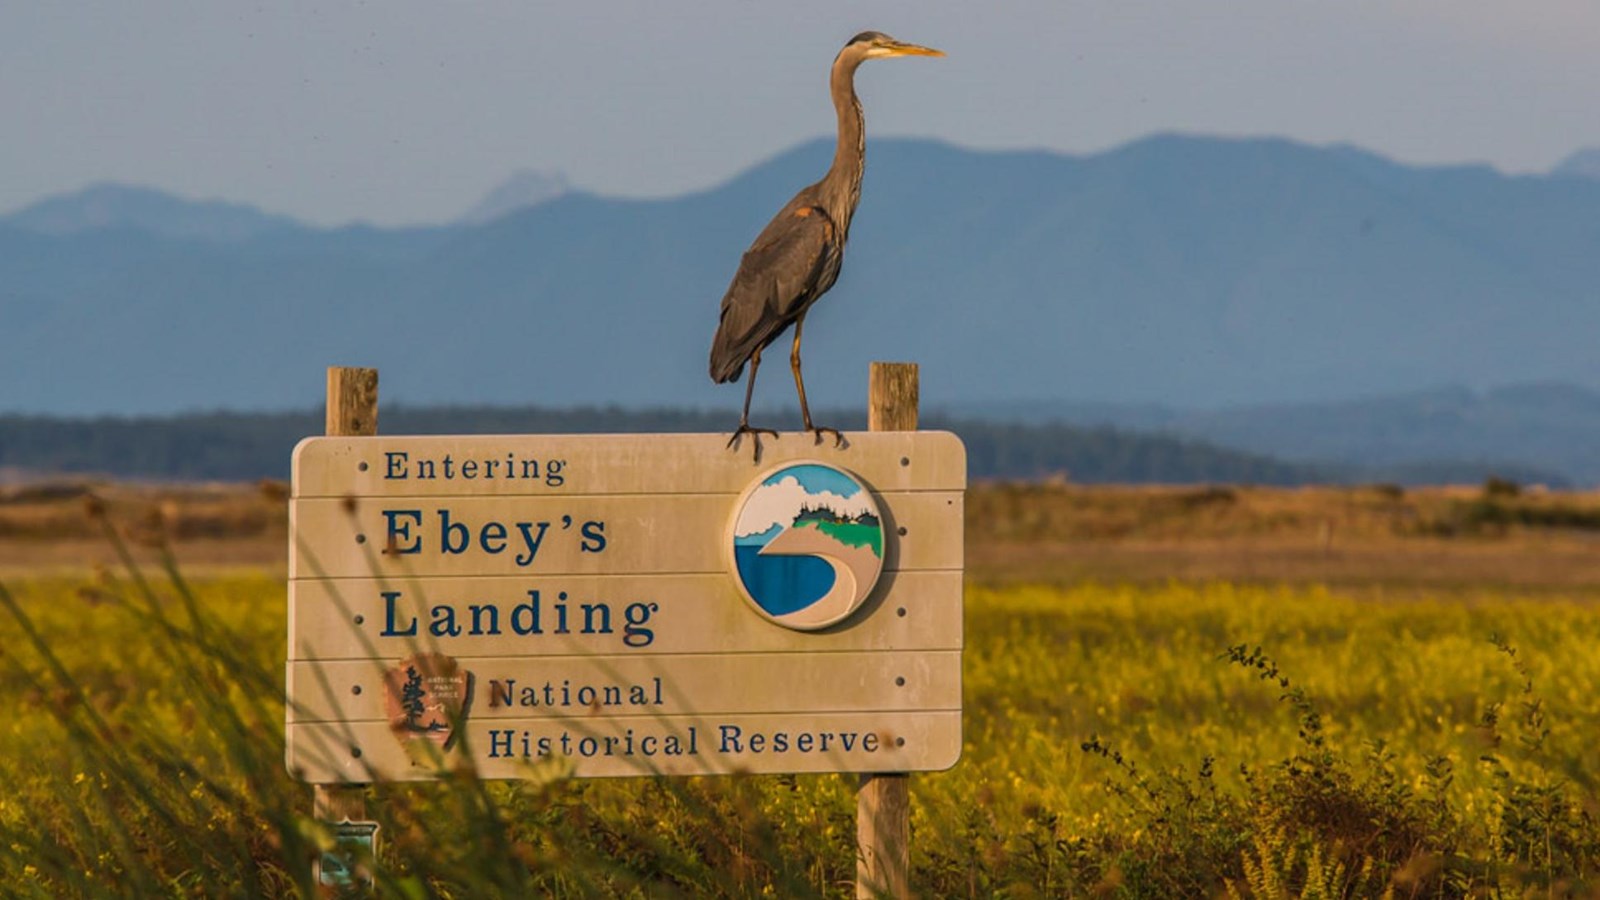 Large bird on sign in grass with mountains behind.